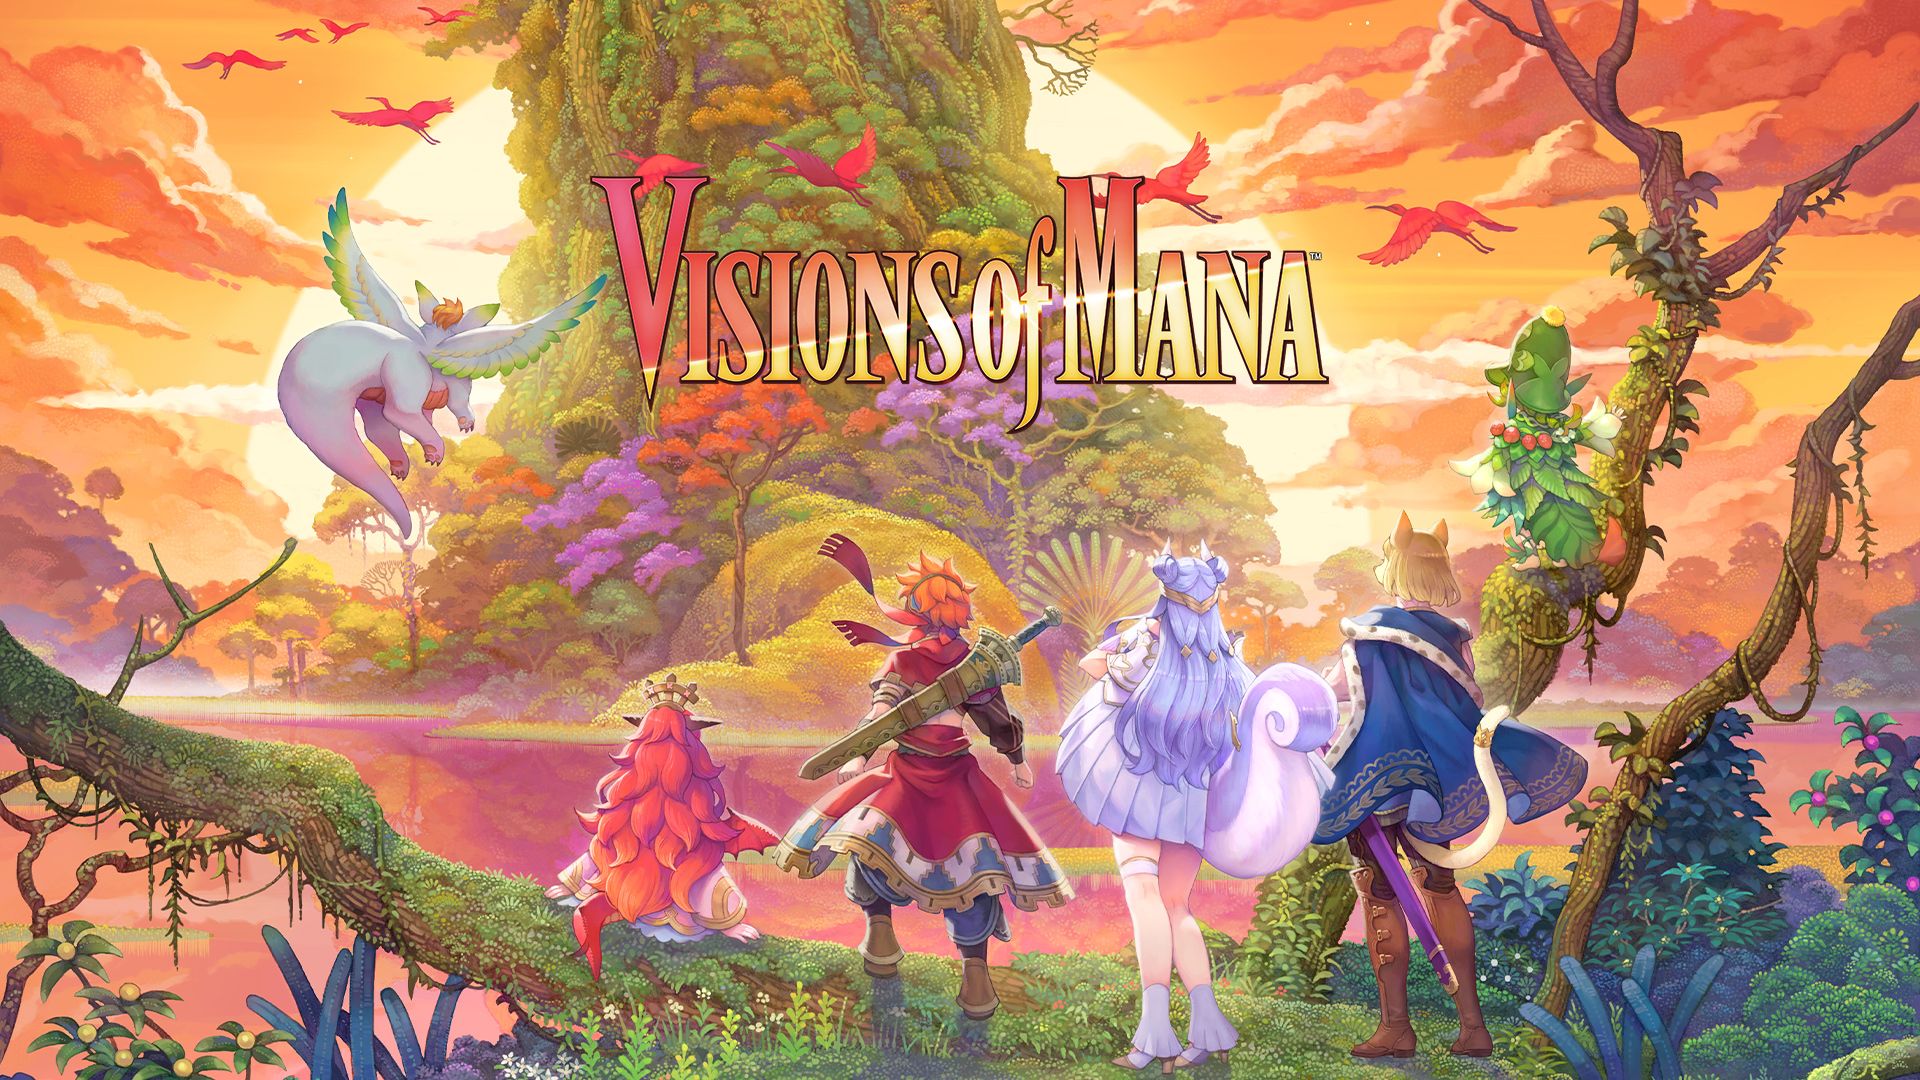 Visions of Mana “Definitely Has the Highest Volume of Content” in the Series, Says Producer